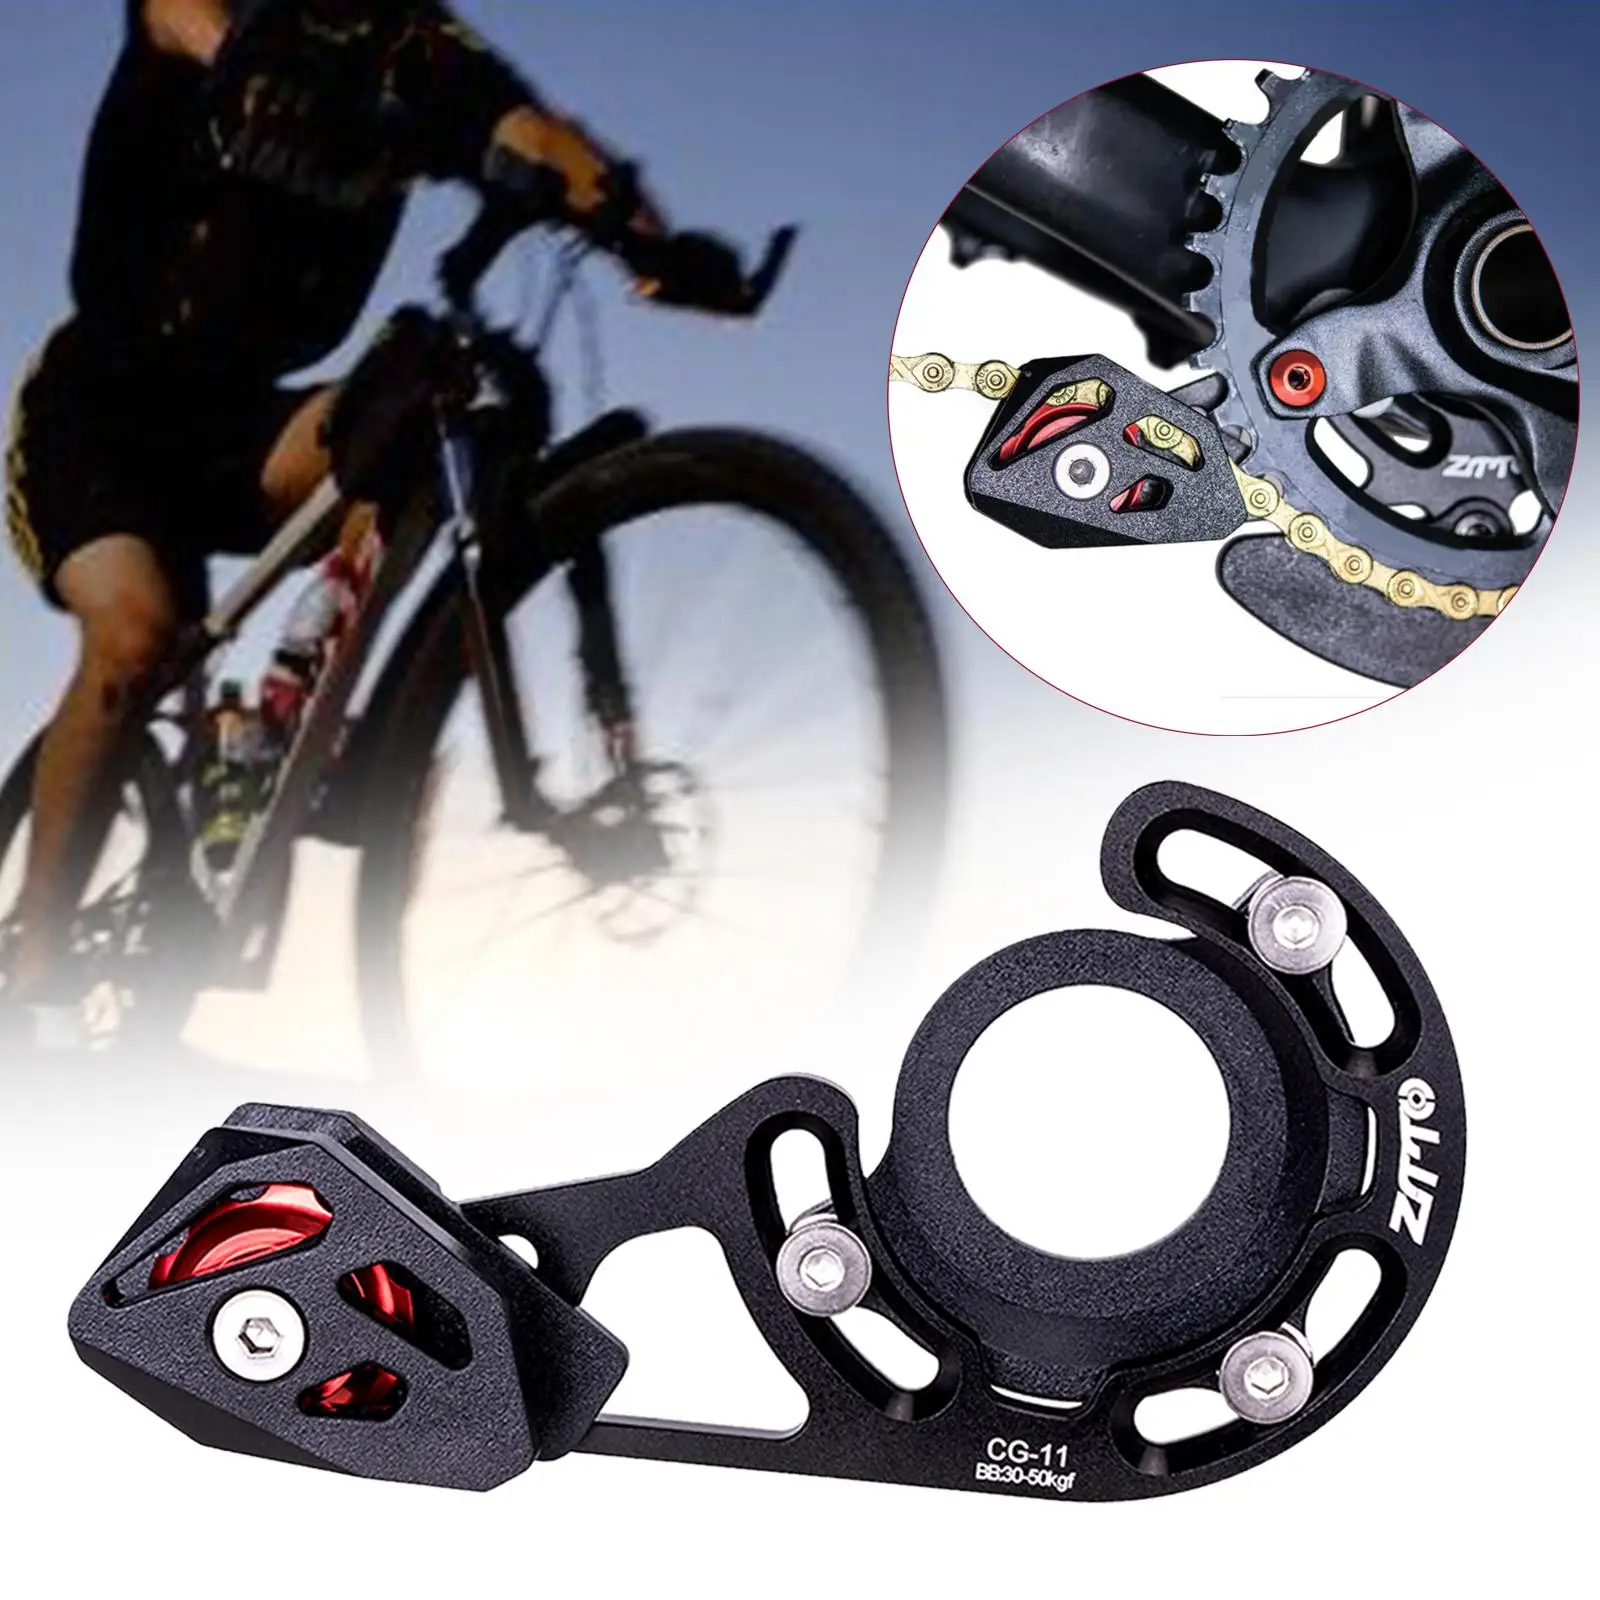 lovehousesky MTB Bike Chain Guider 28T-38T Iscg05 BB Mount 1x System Lightweight